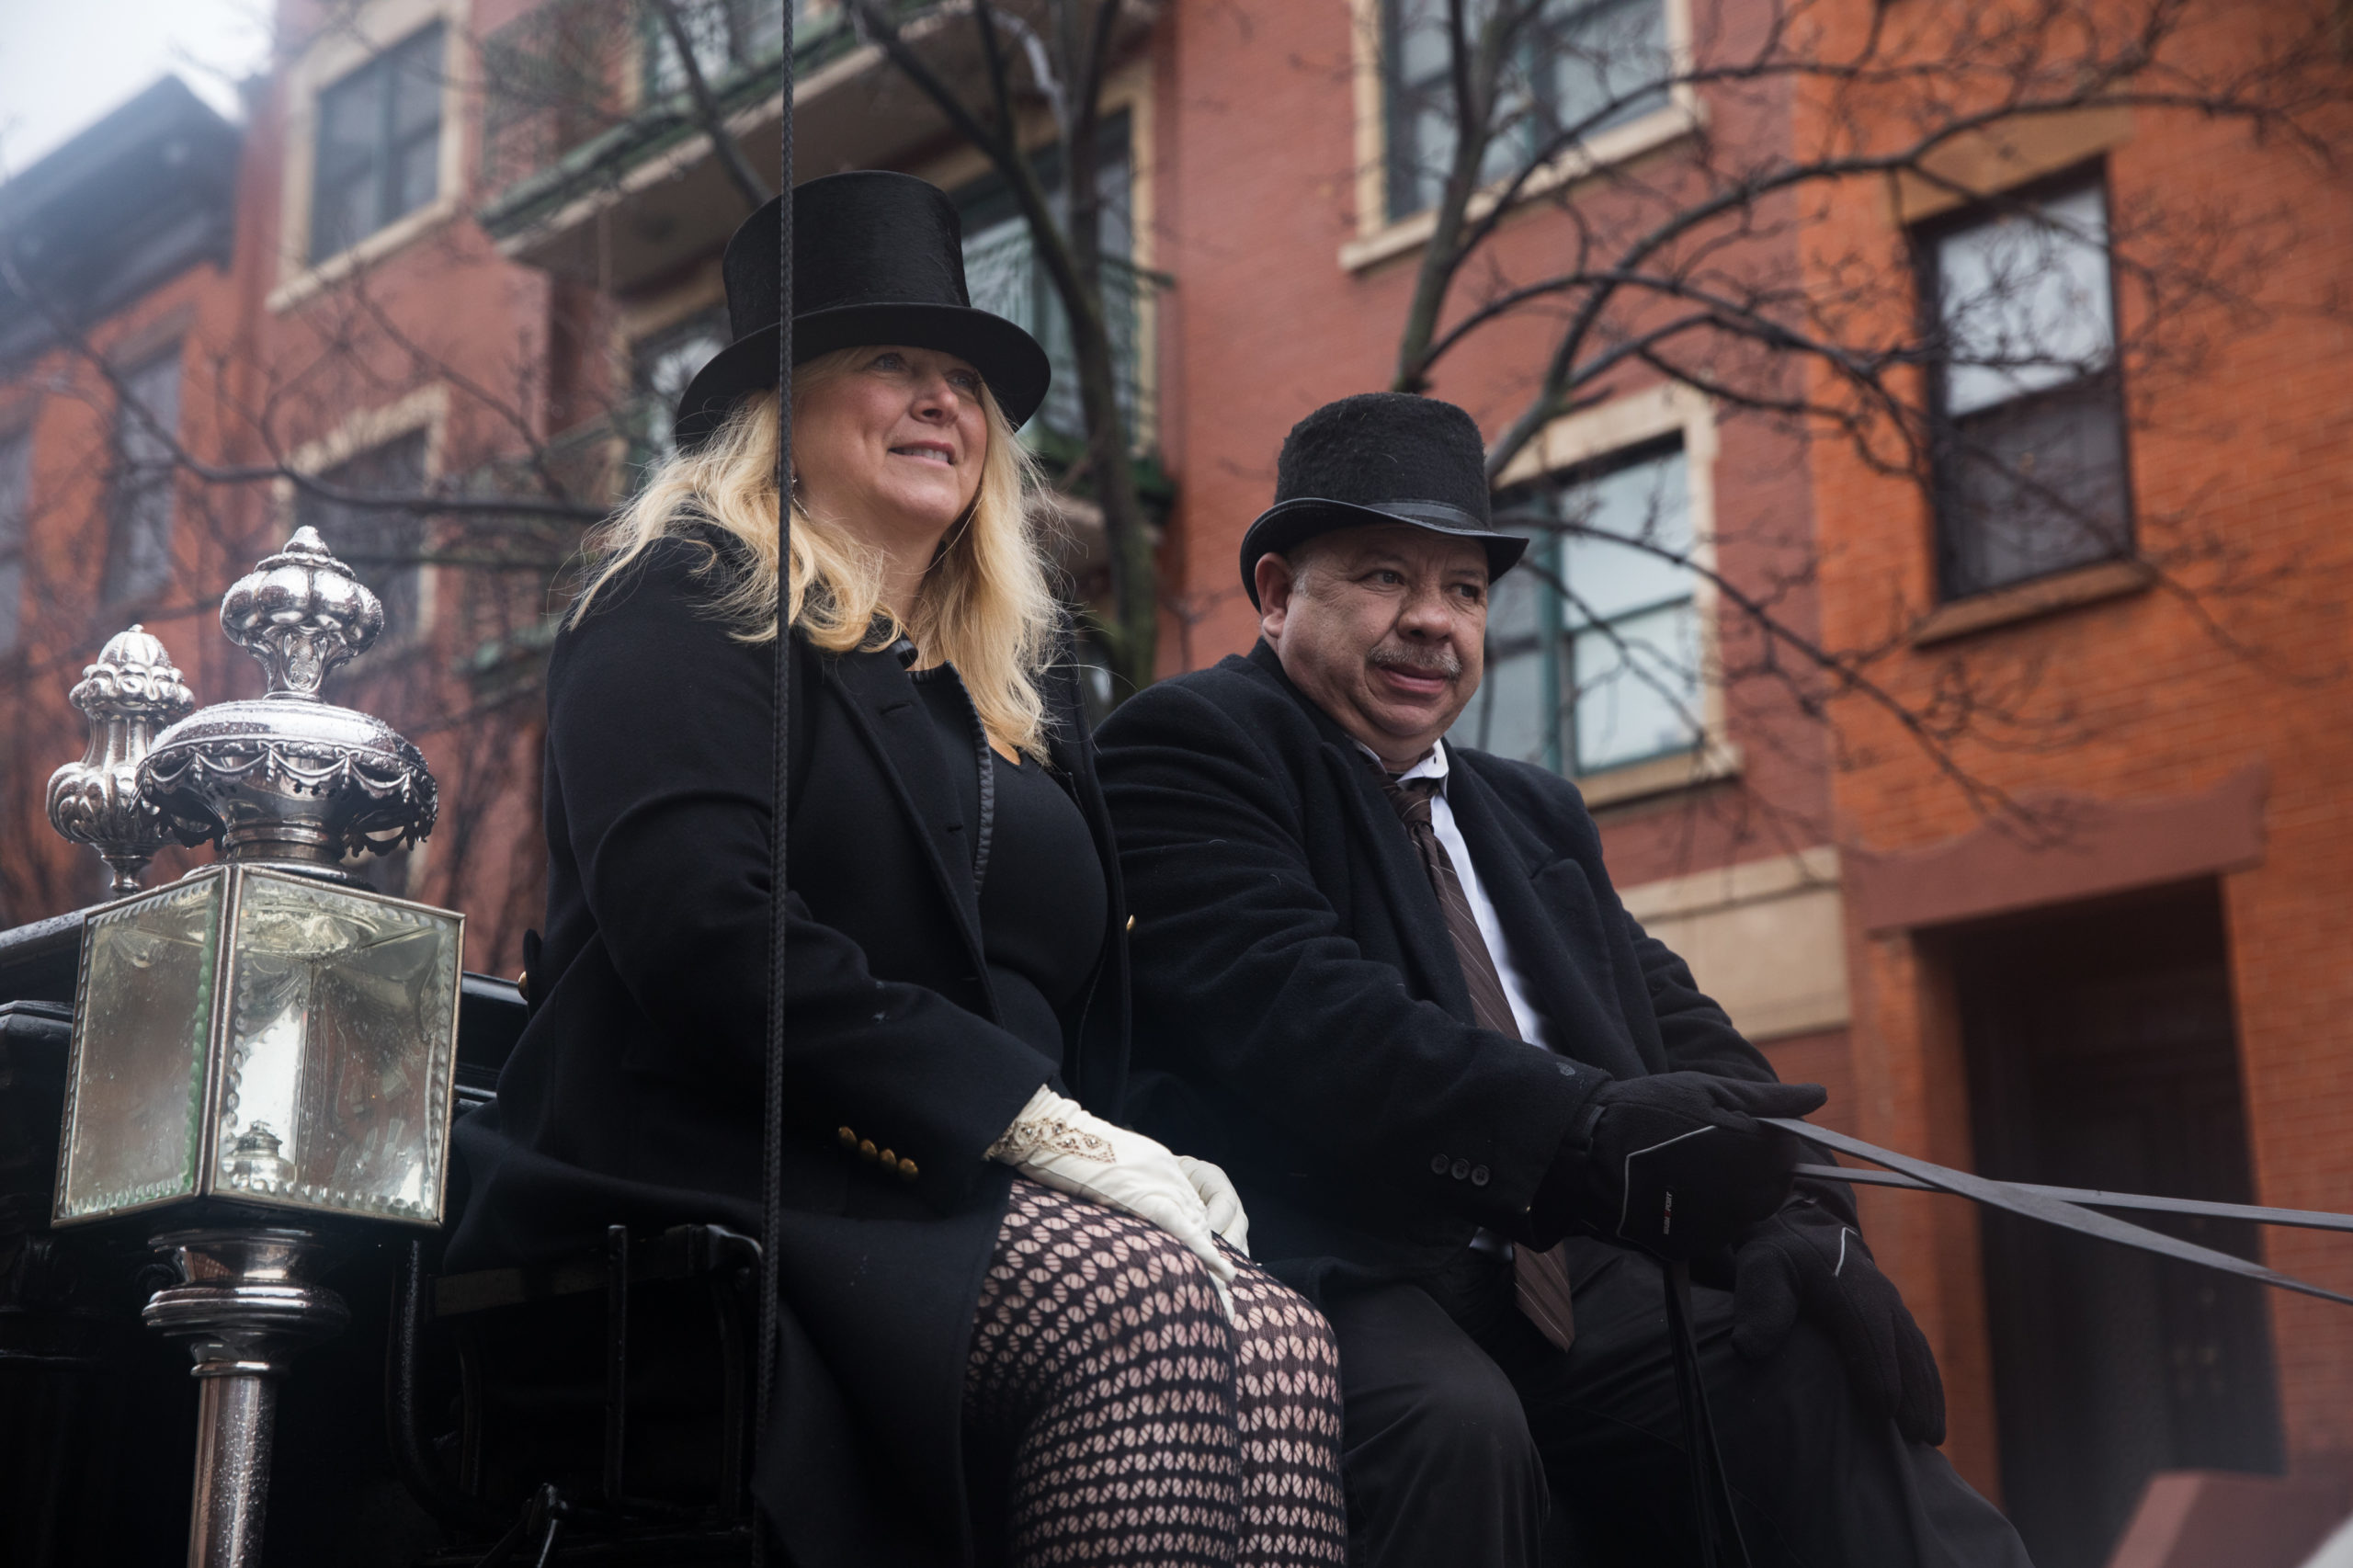 Guido rides passenger on the horse-drawn hearse that's been in her family since the 1800s. 